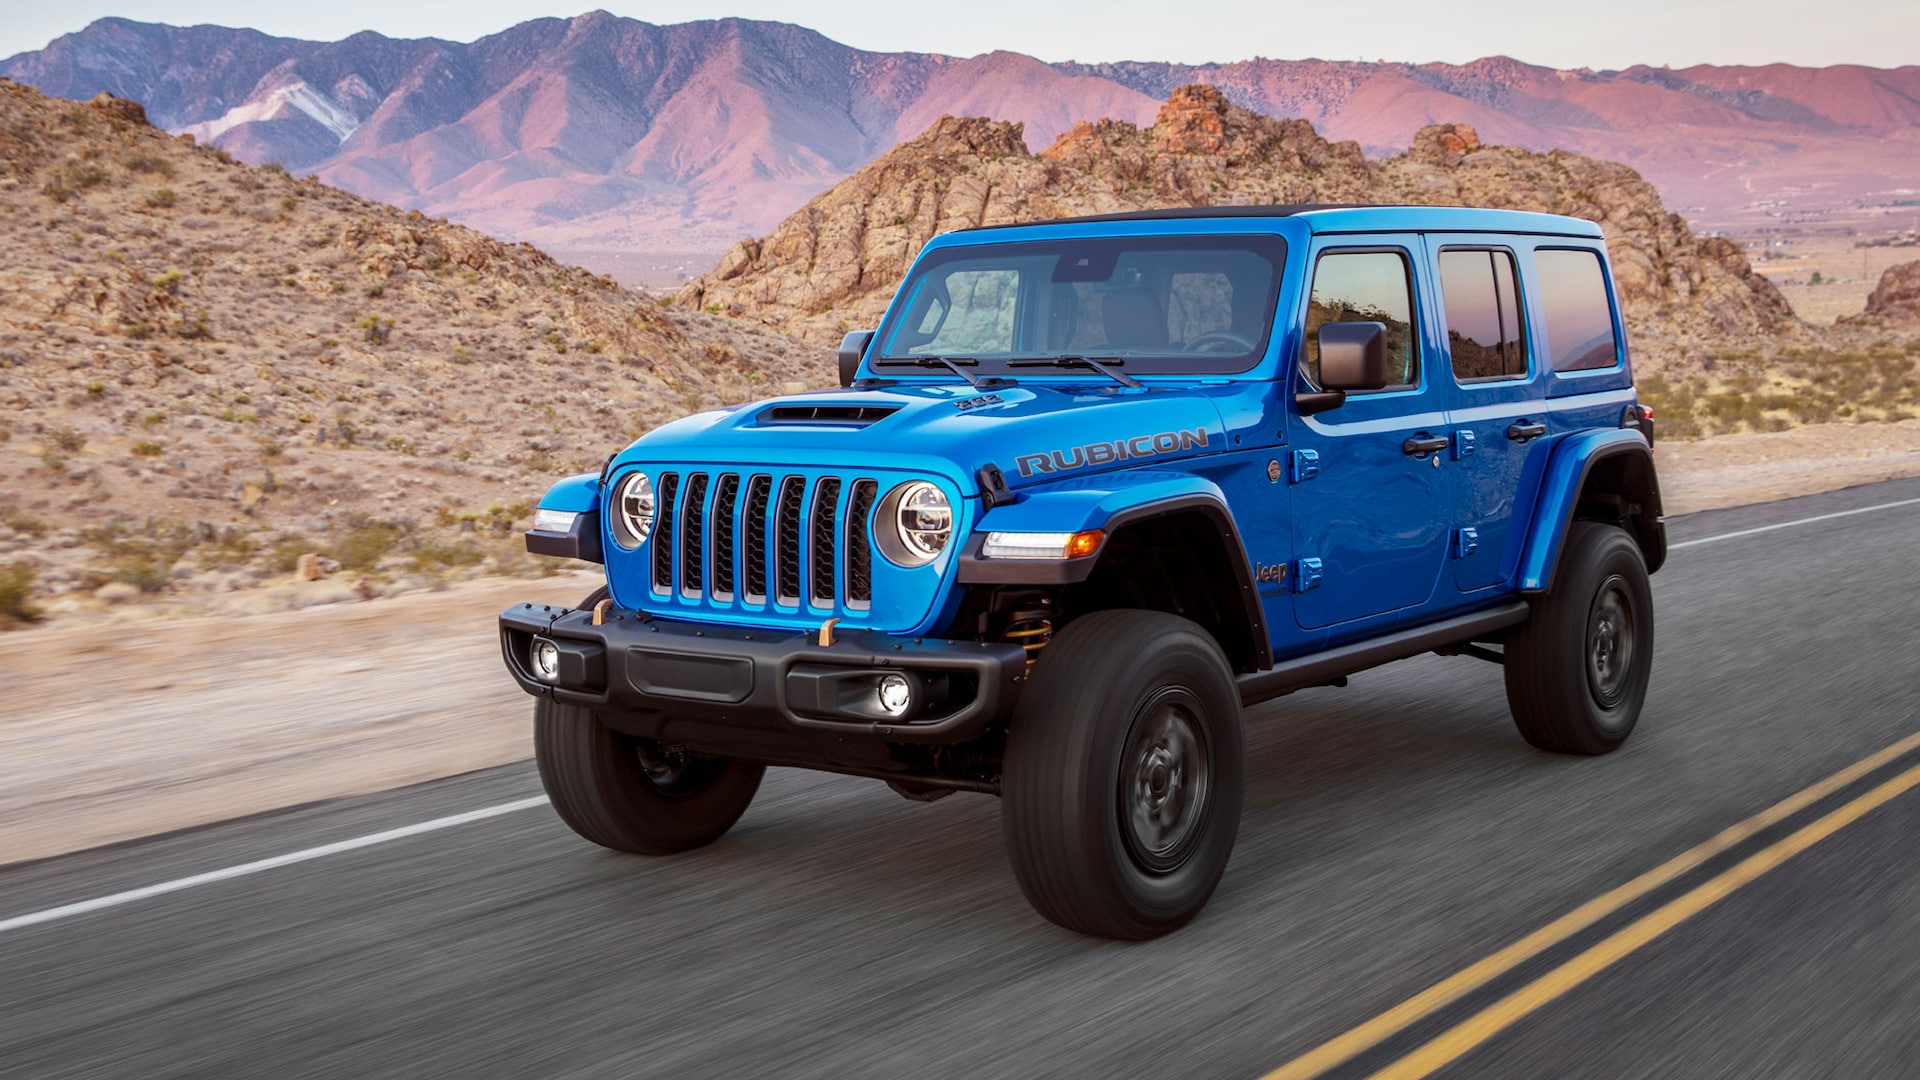 2022 Jeep Wrangler Prices, Reviews, and Photos - MotorTrend